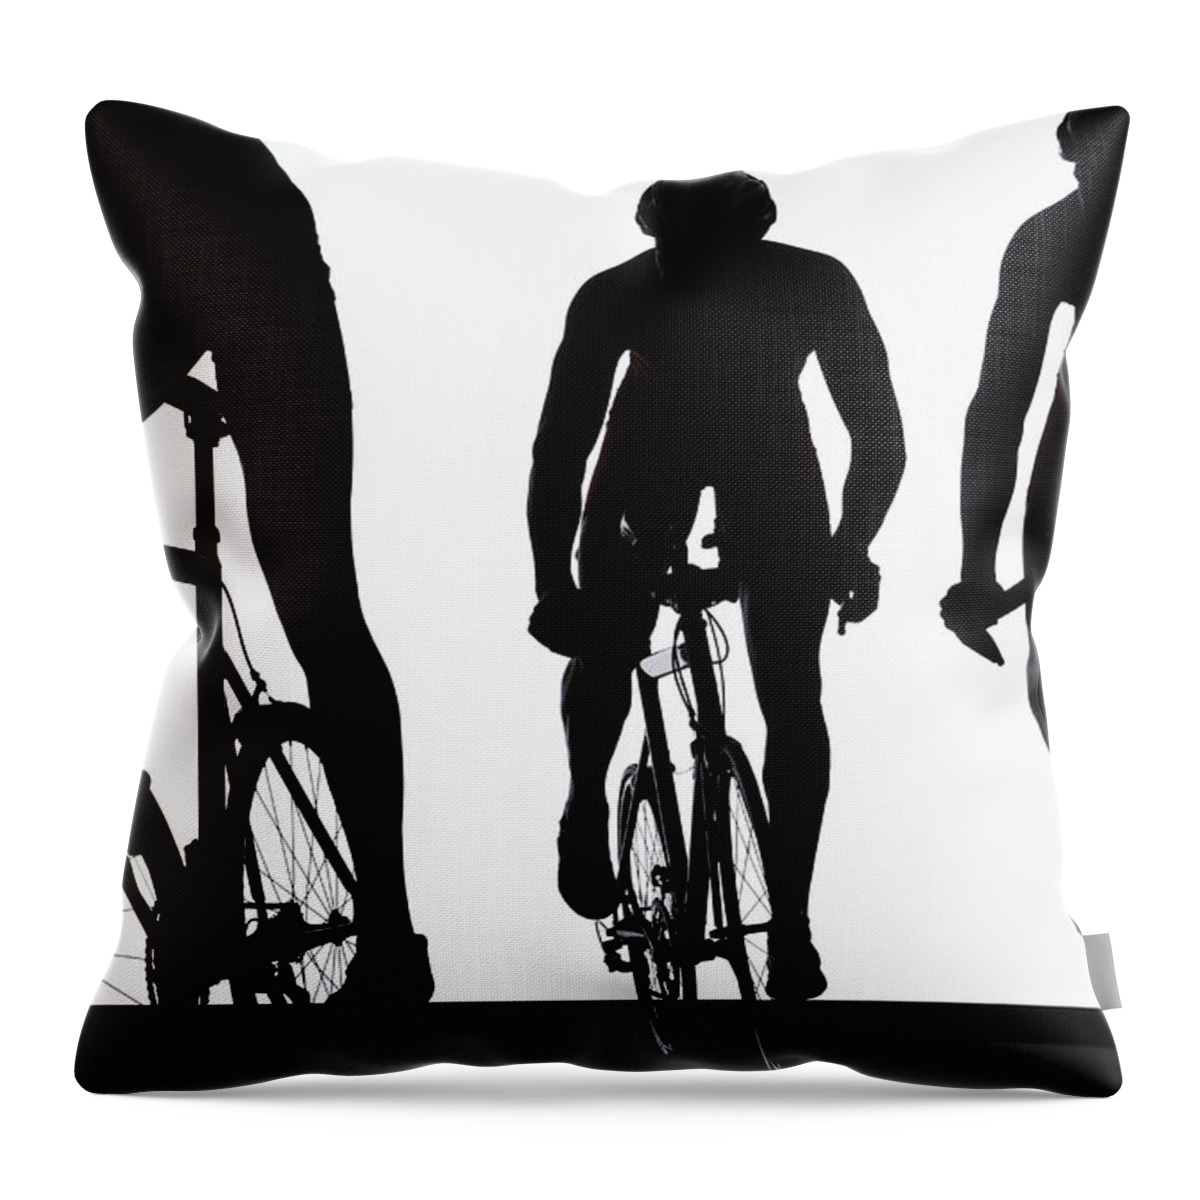 People Throw Pillow featuring the photograph Silhouette Of Three Triathletes Riding by Paul Taylor